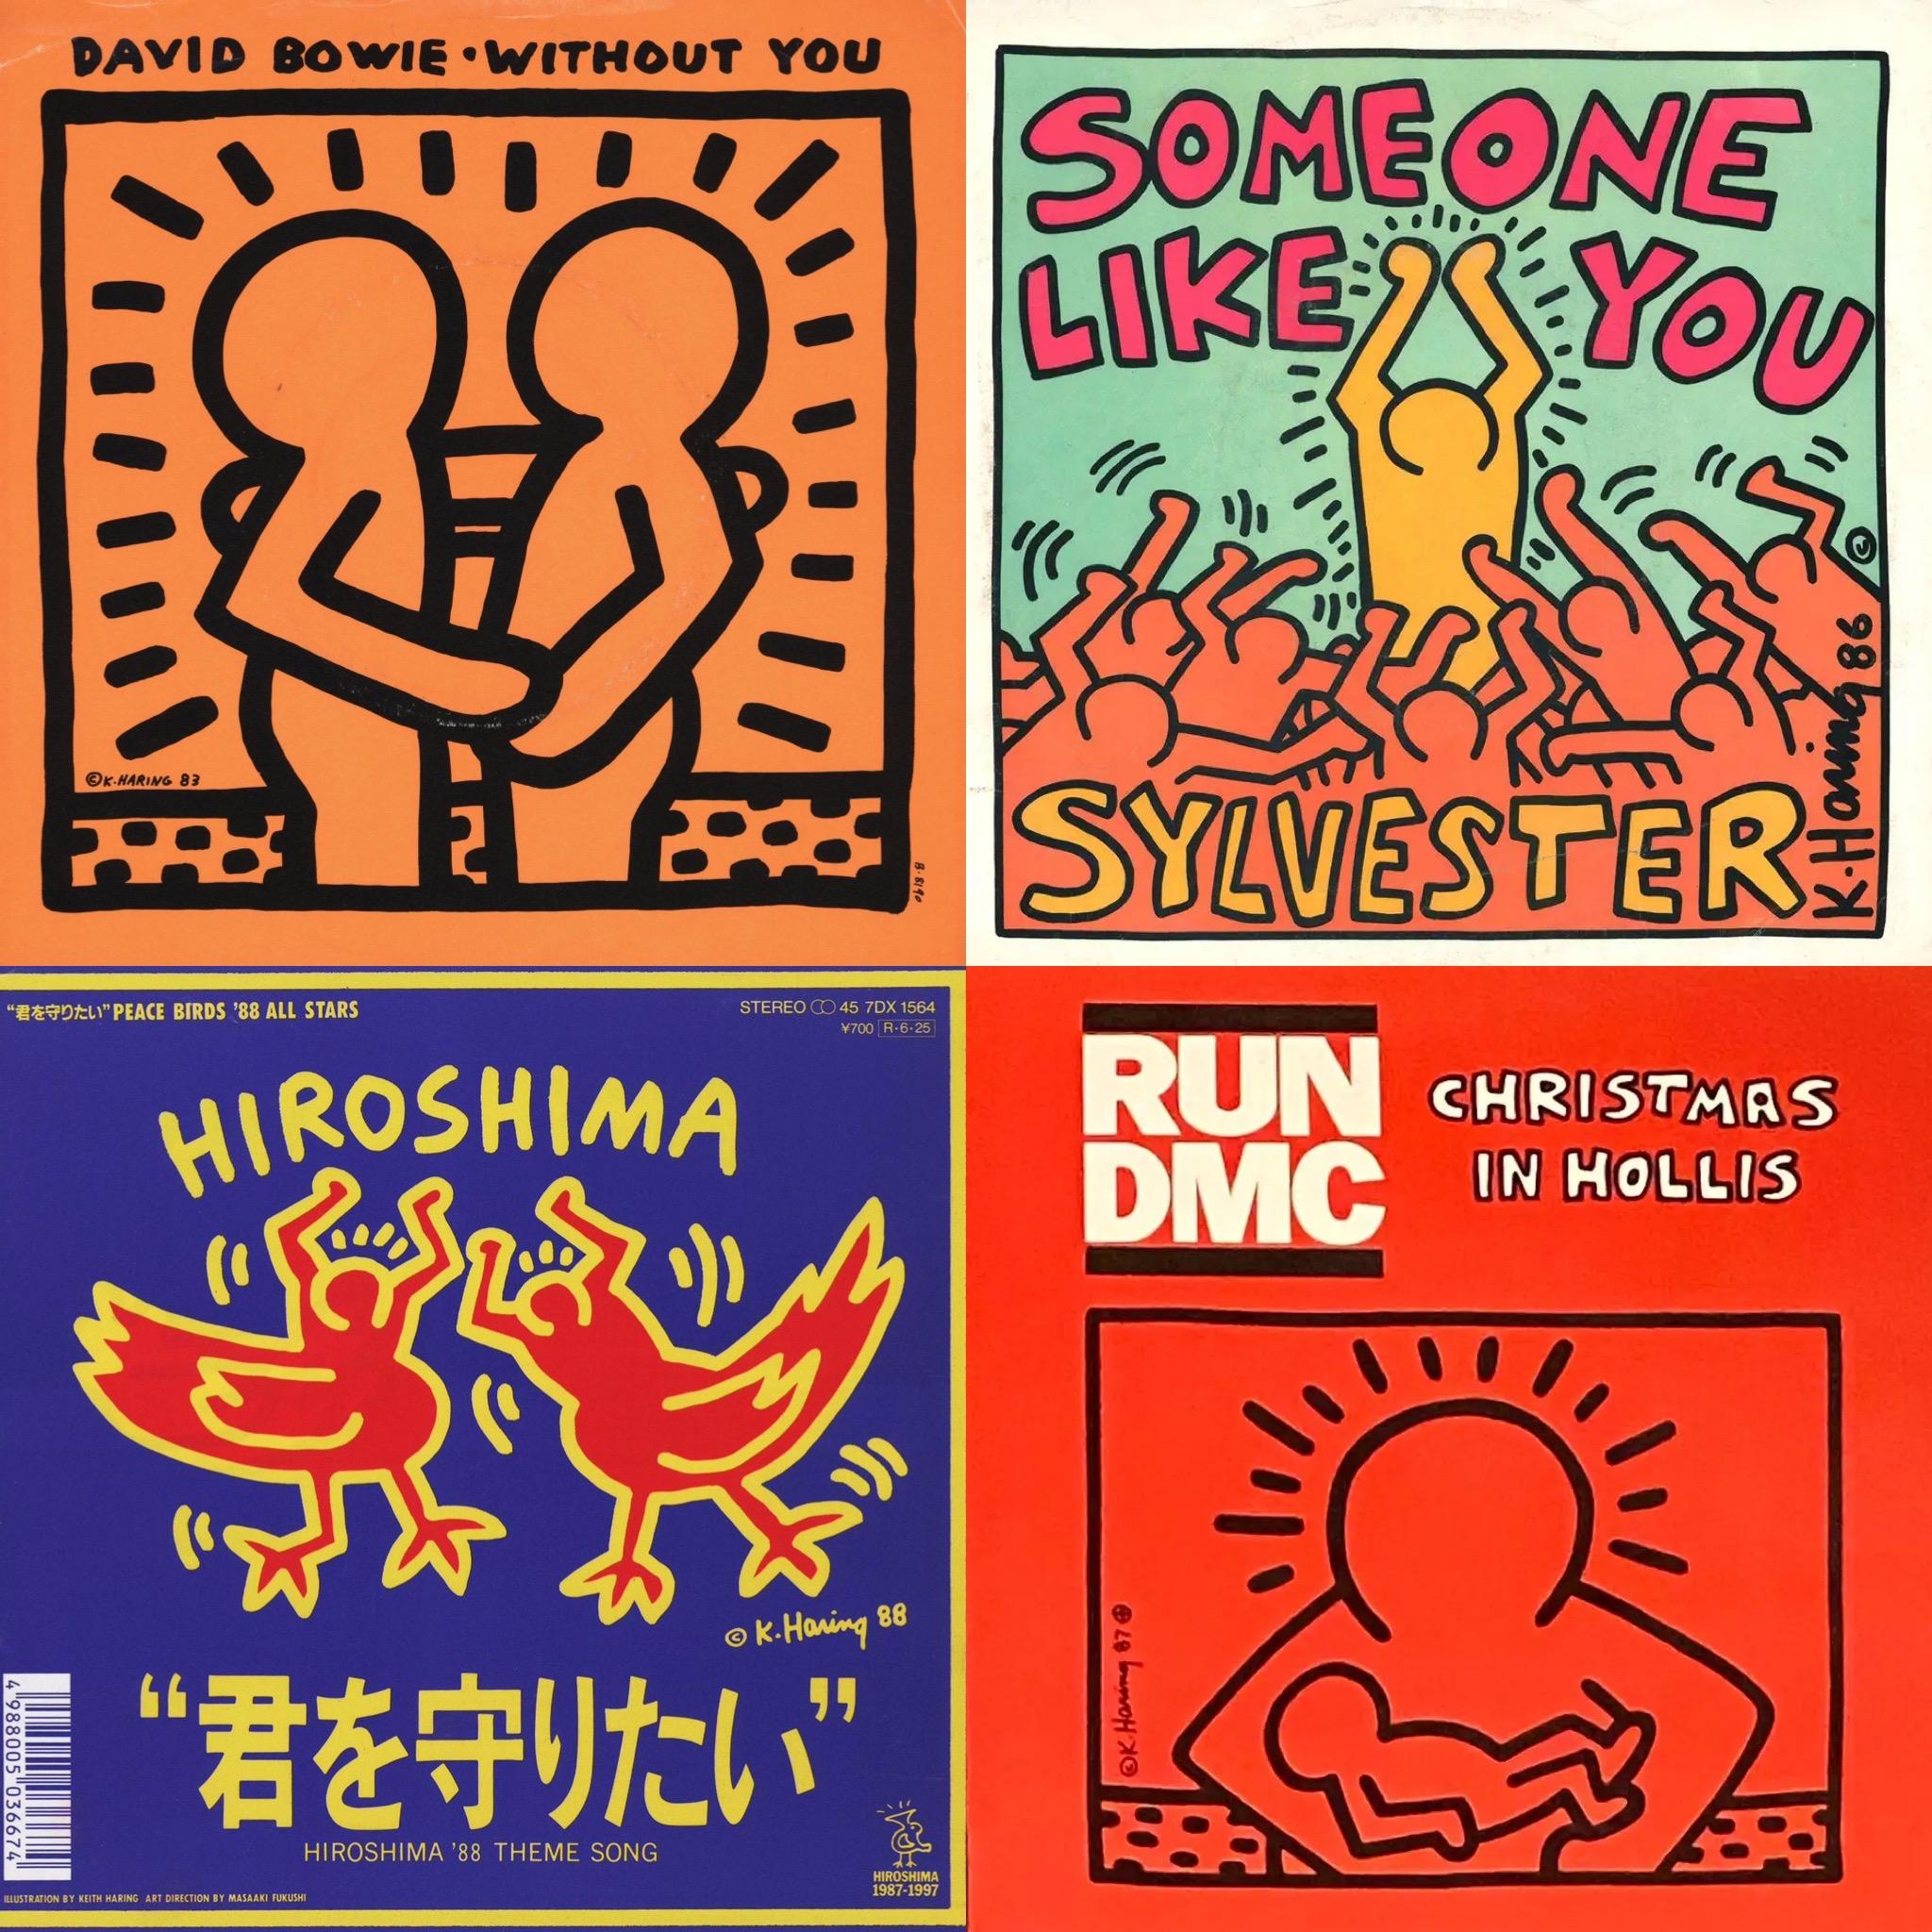 Rare Vintage 1980s Keith Haring Record Cover Art: (Set of 4: 1983-1987):

Four individual 7 inch albums - all illustrated by Haring during his lifetime - making for standout 1980s Keith Haring wall art within reason.

Offset lithograph; 7 x 7 inches